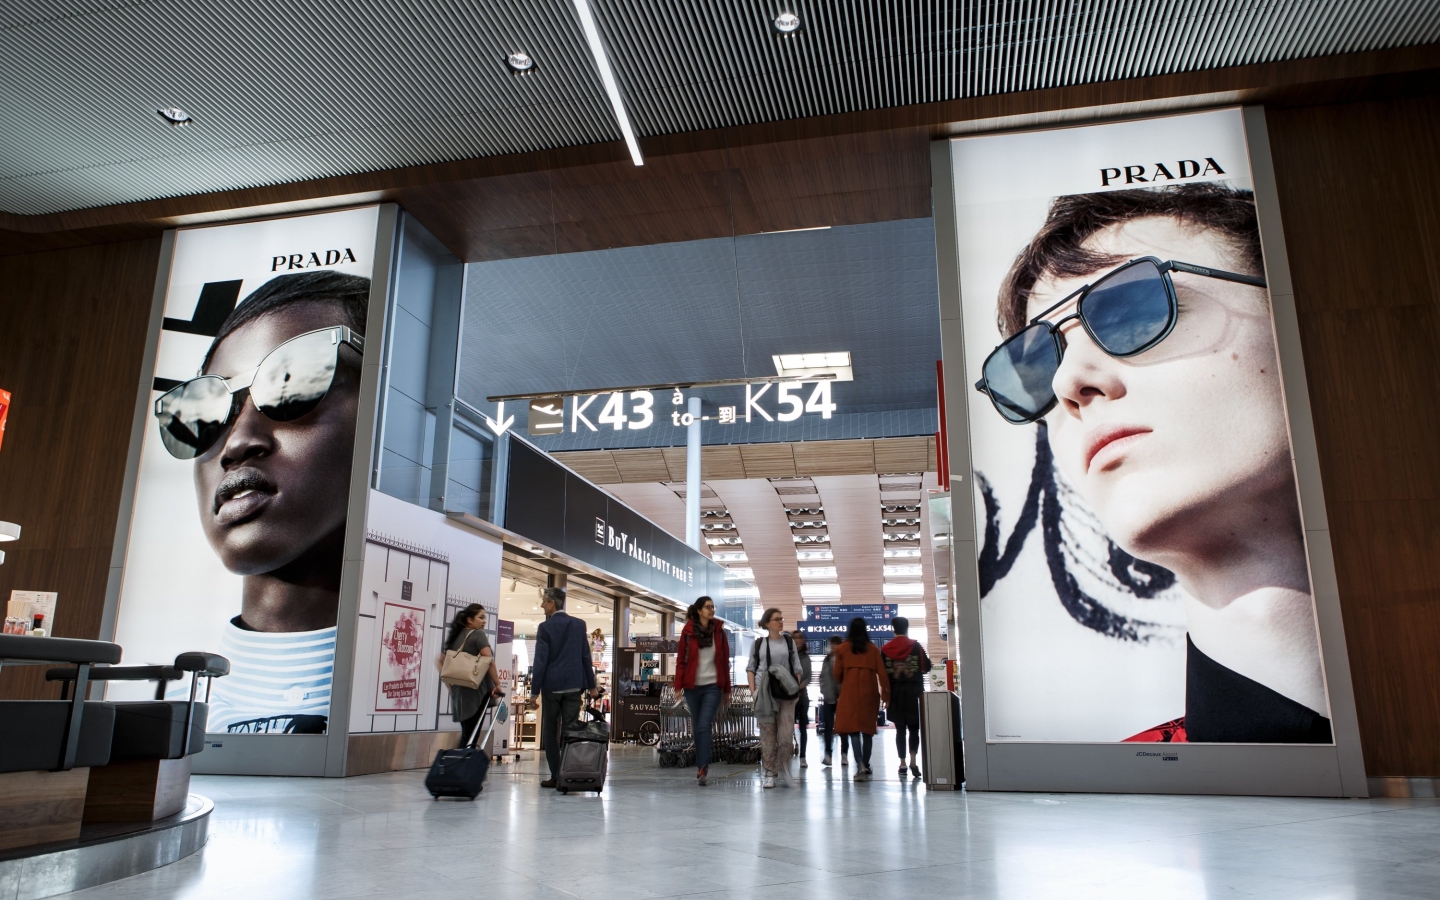 10 Reasons why airport advertising works, Prada, JCDecaux France, 2018 March